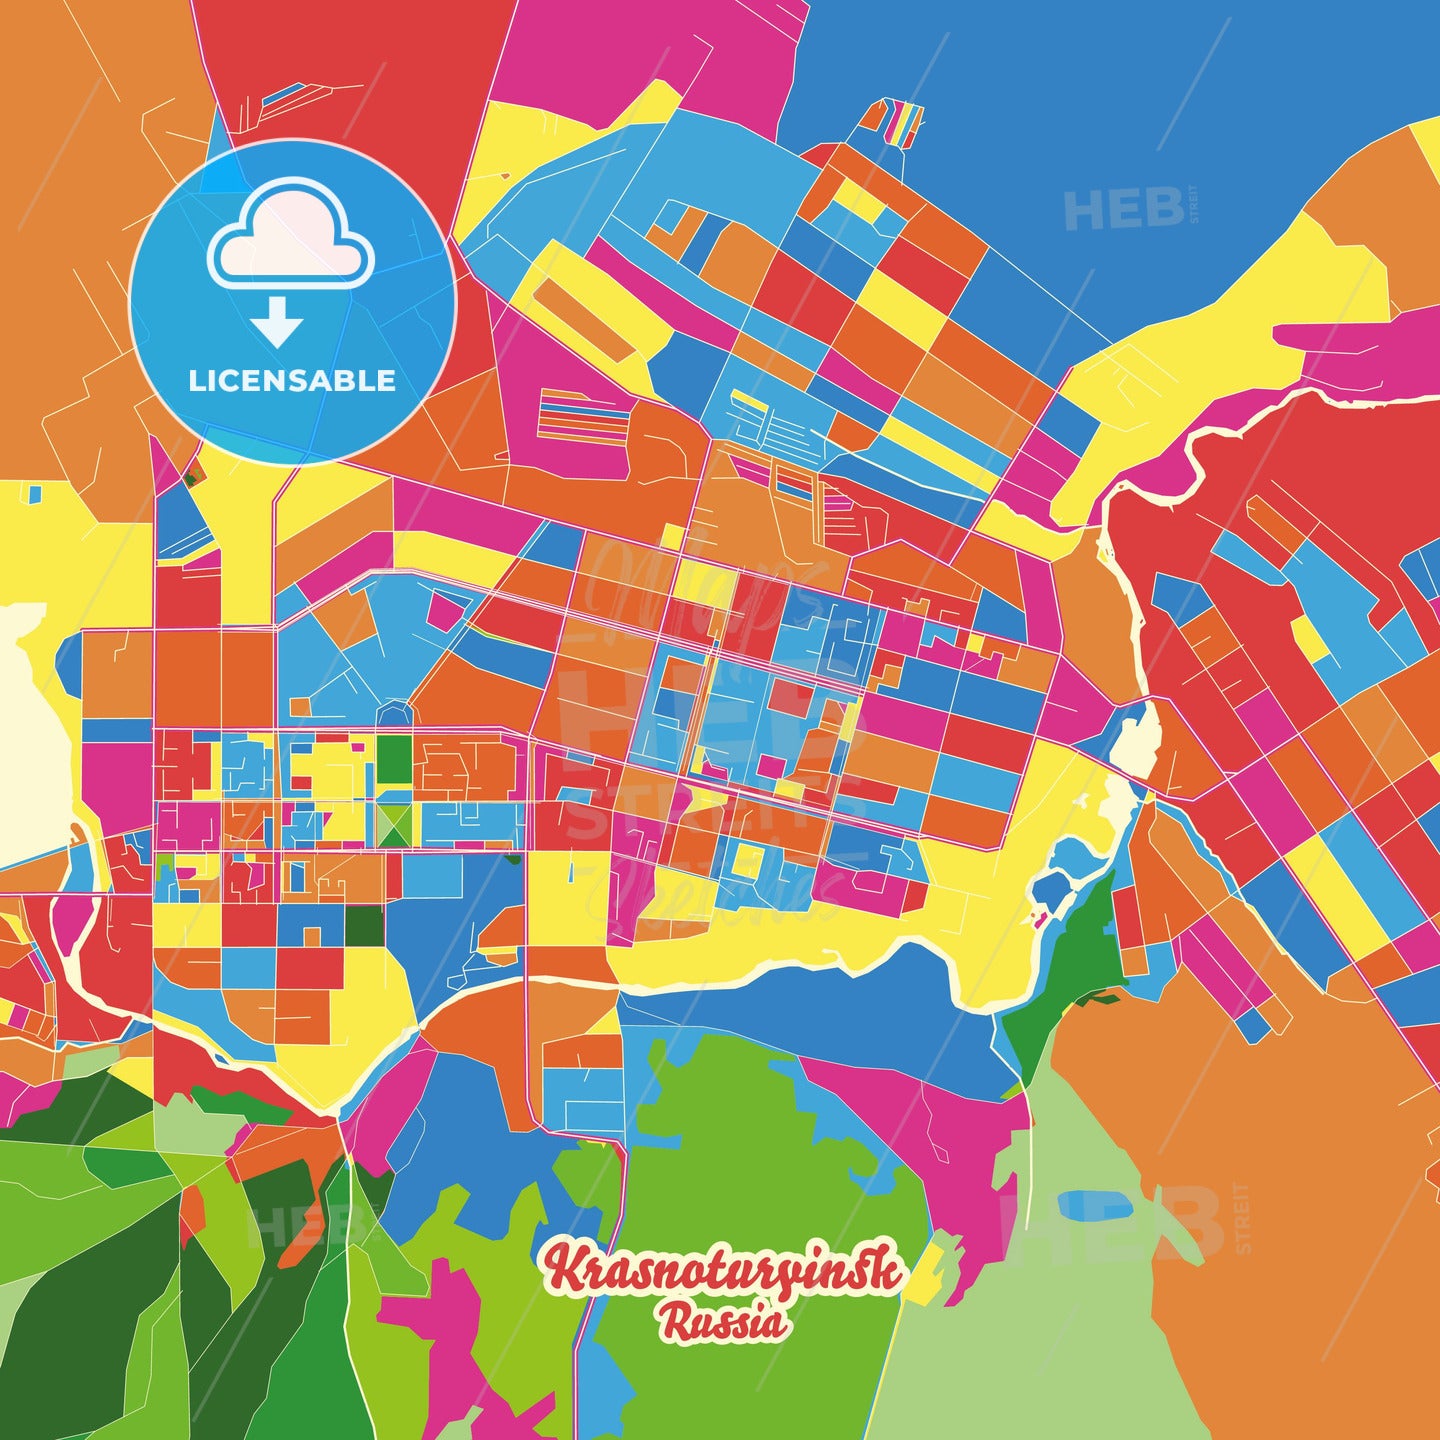 Krasnoturyinsk, Russia Crazy Colorful Street Map Poster Template - HEBSTREITS Sketches